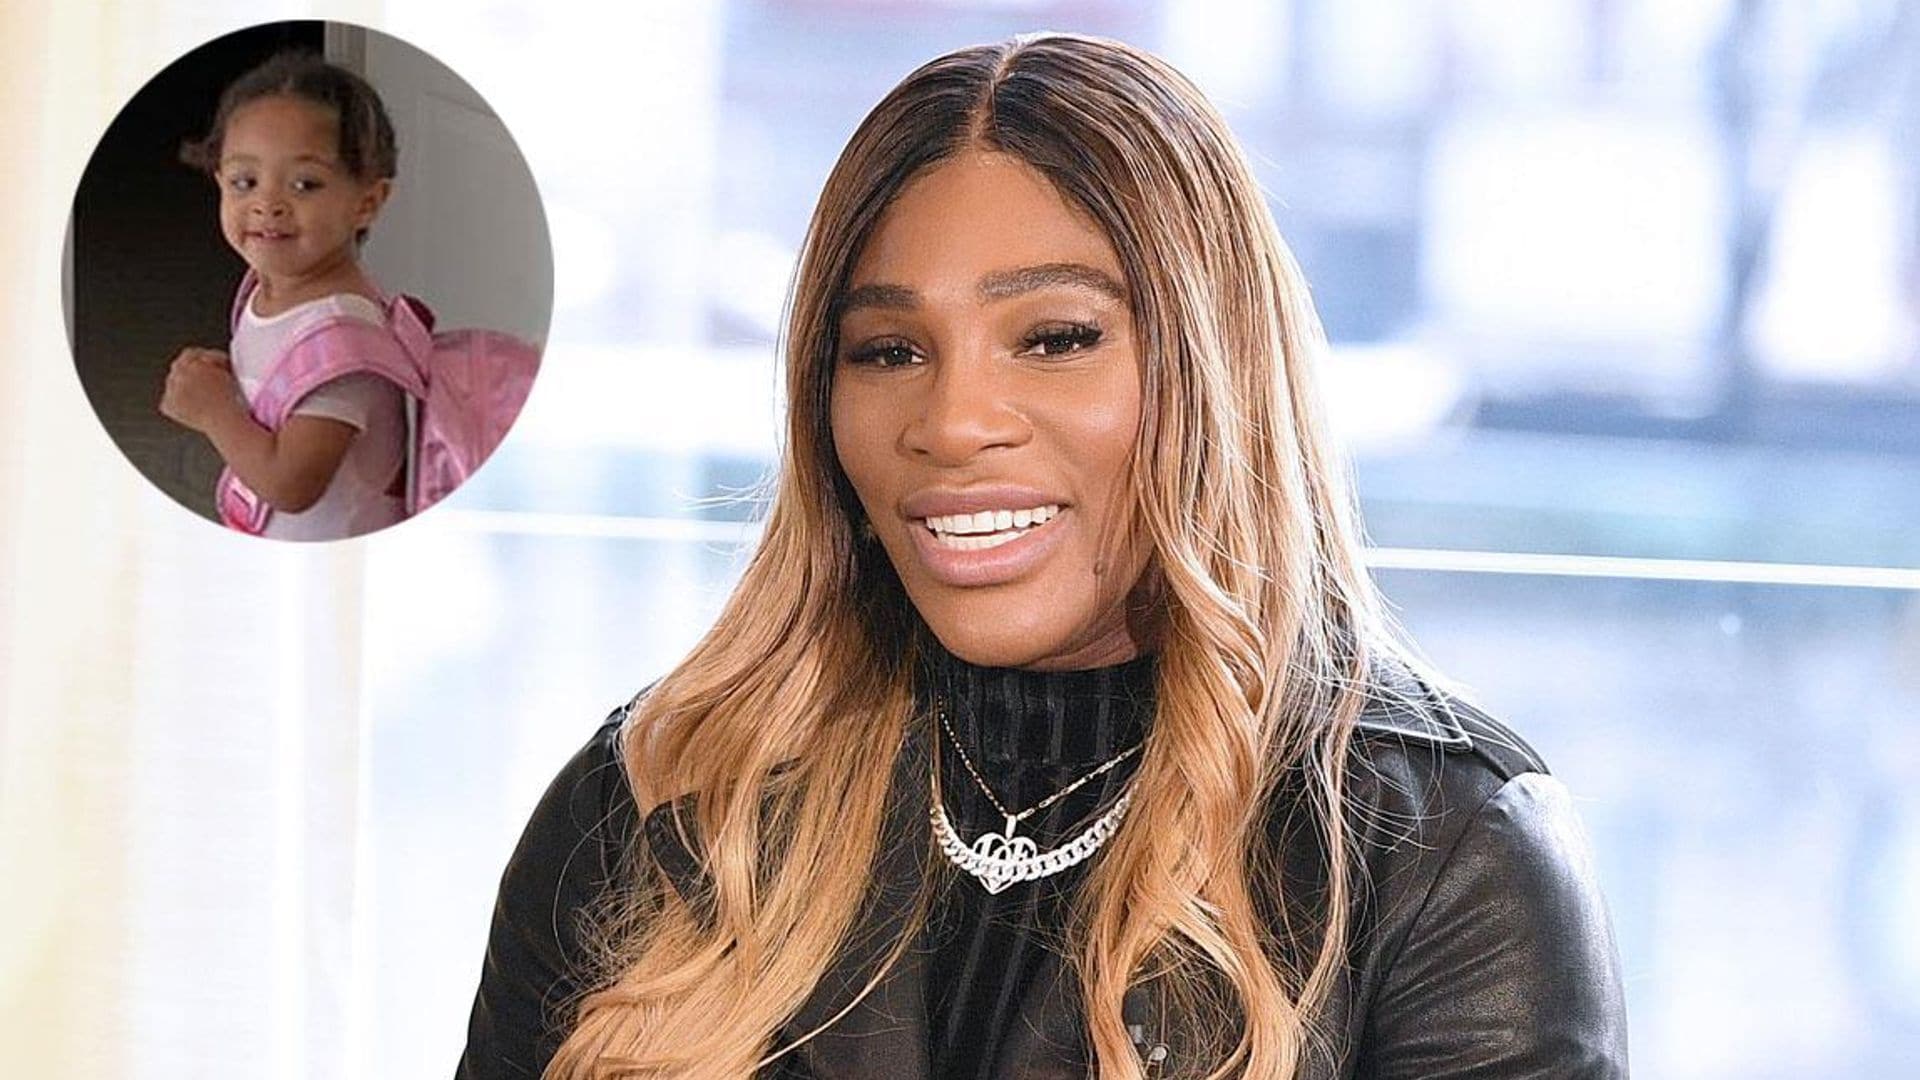 Serena Williams shares how she overcame the heartbreak of missing daughter’s first steps